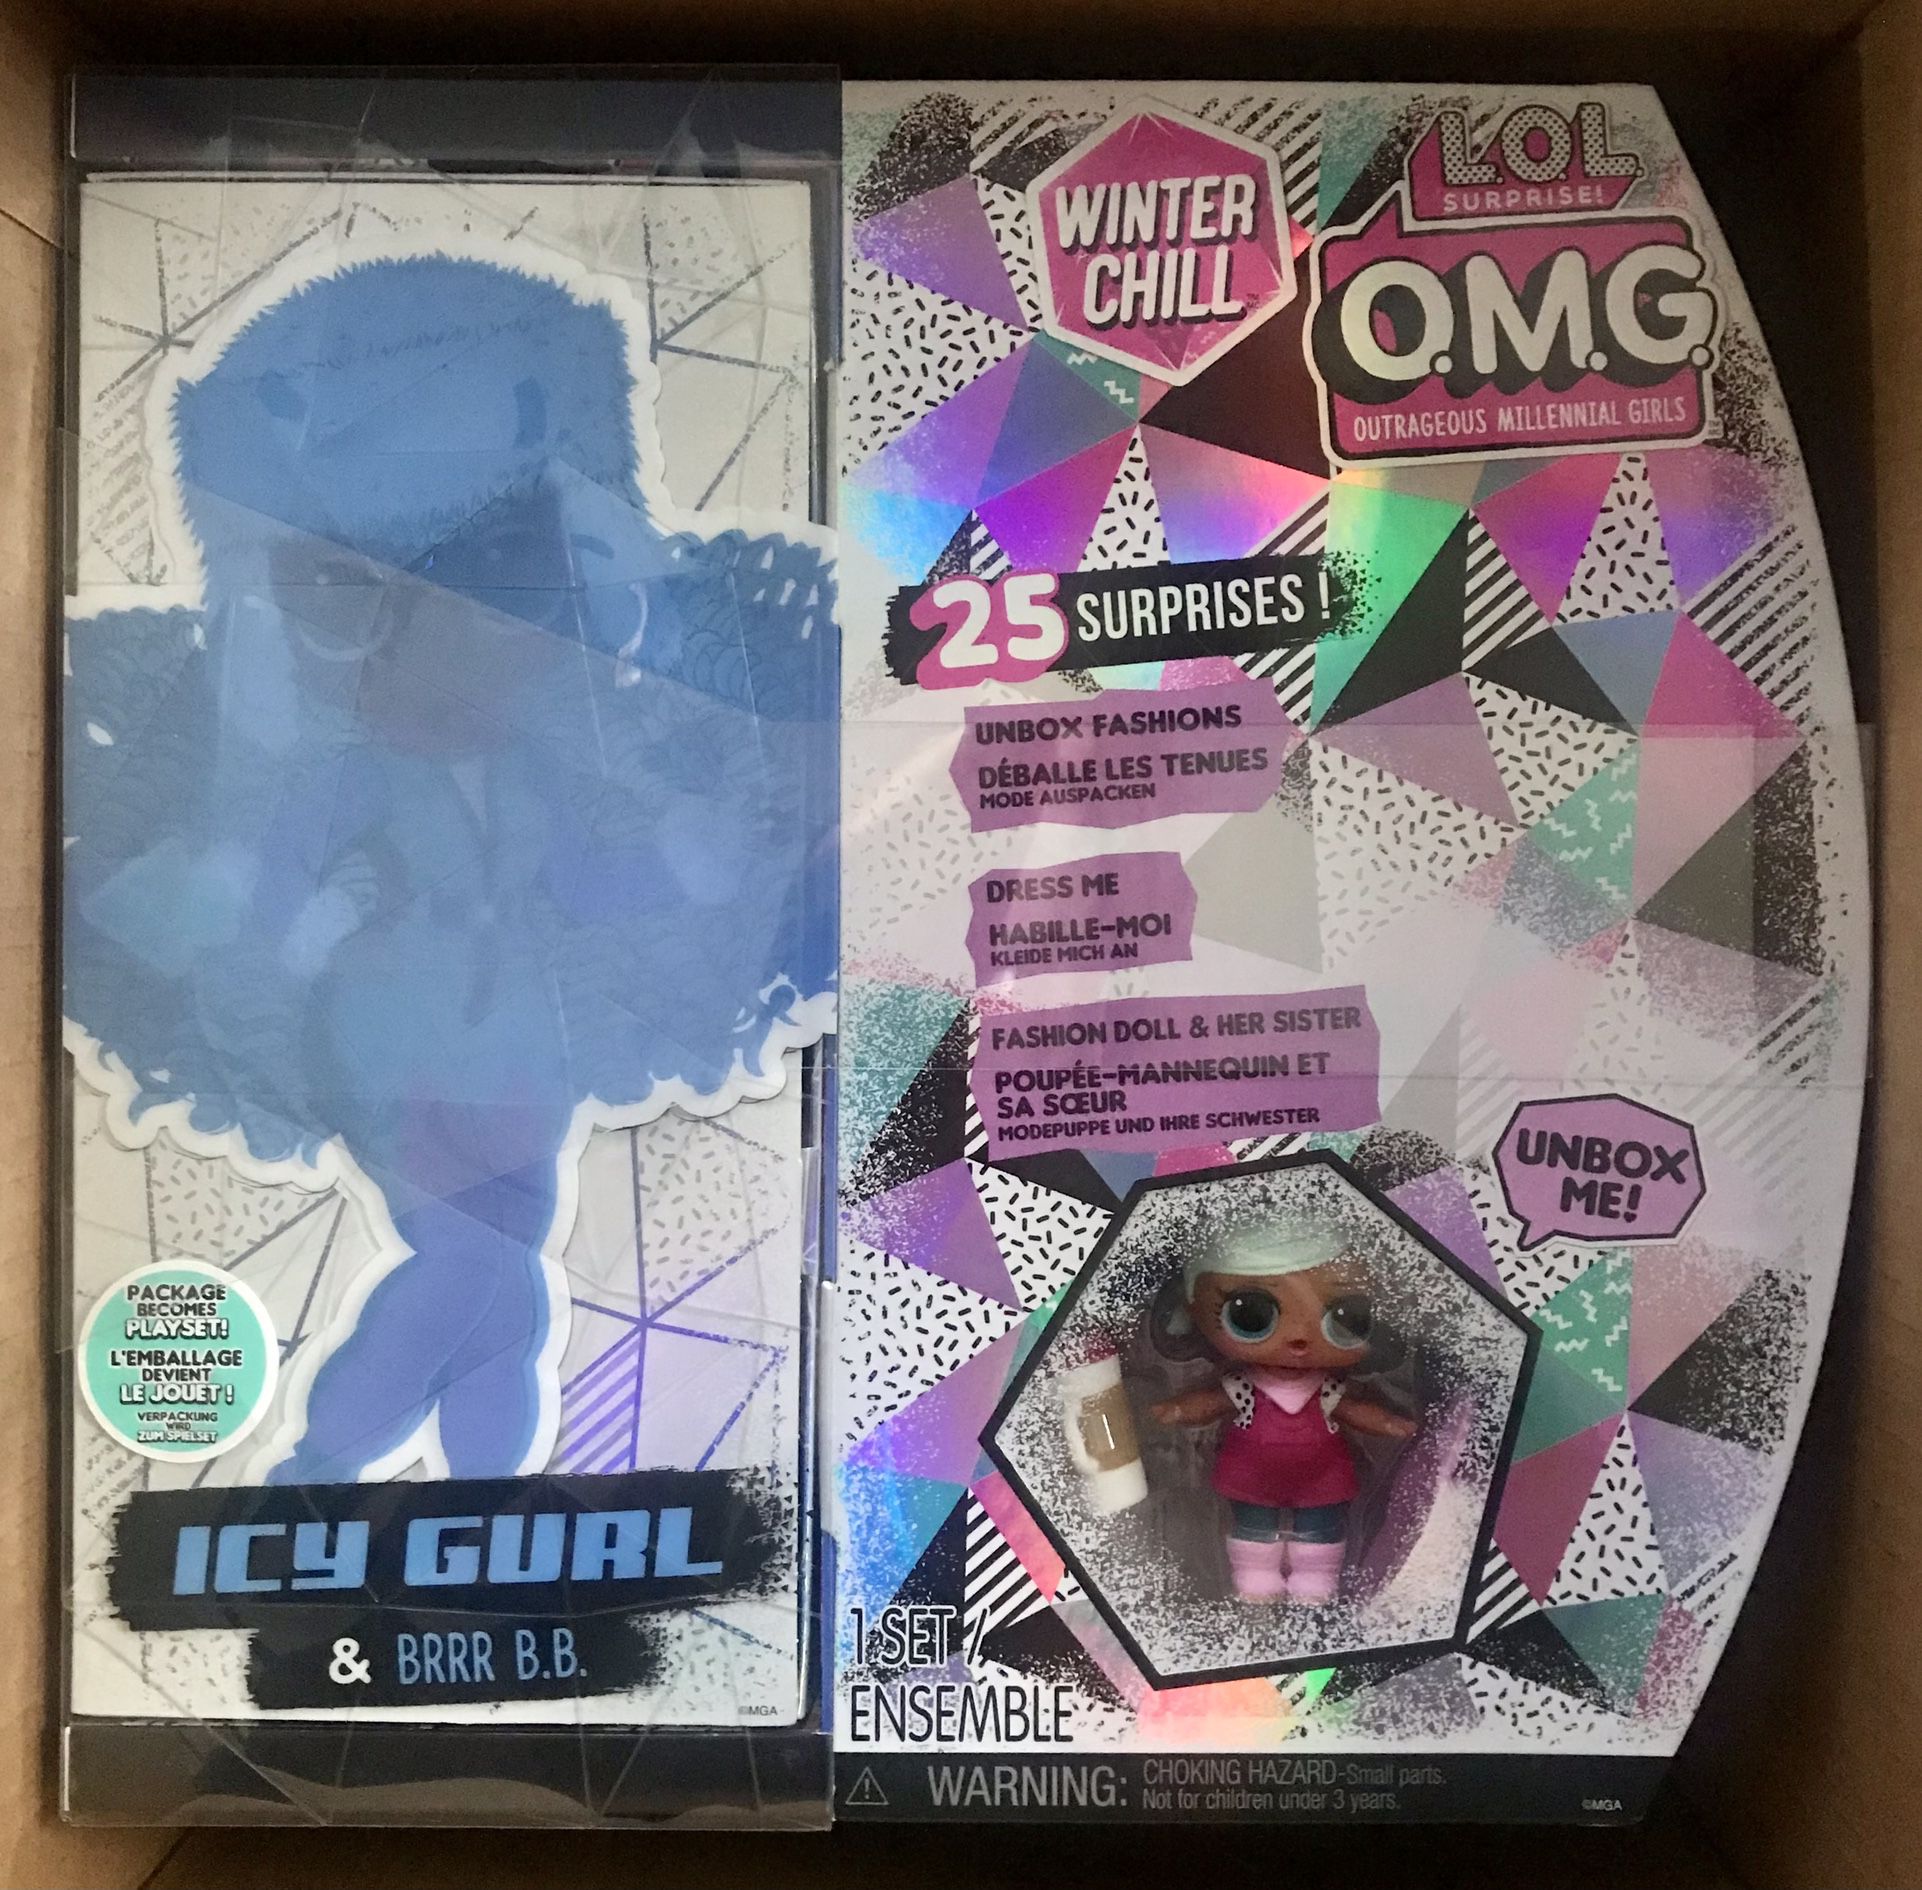 LOL Surprise OMG Winter Chill ICY Gurl Doll & Brrr BB Doll - 25 Surprises NEW!